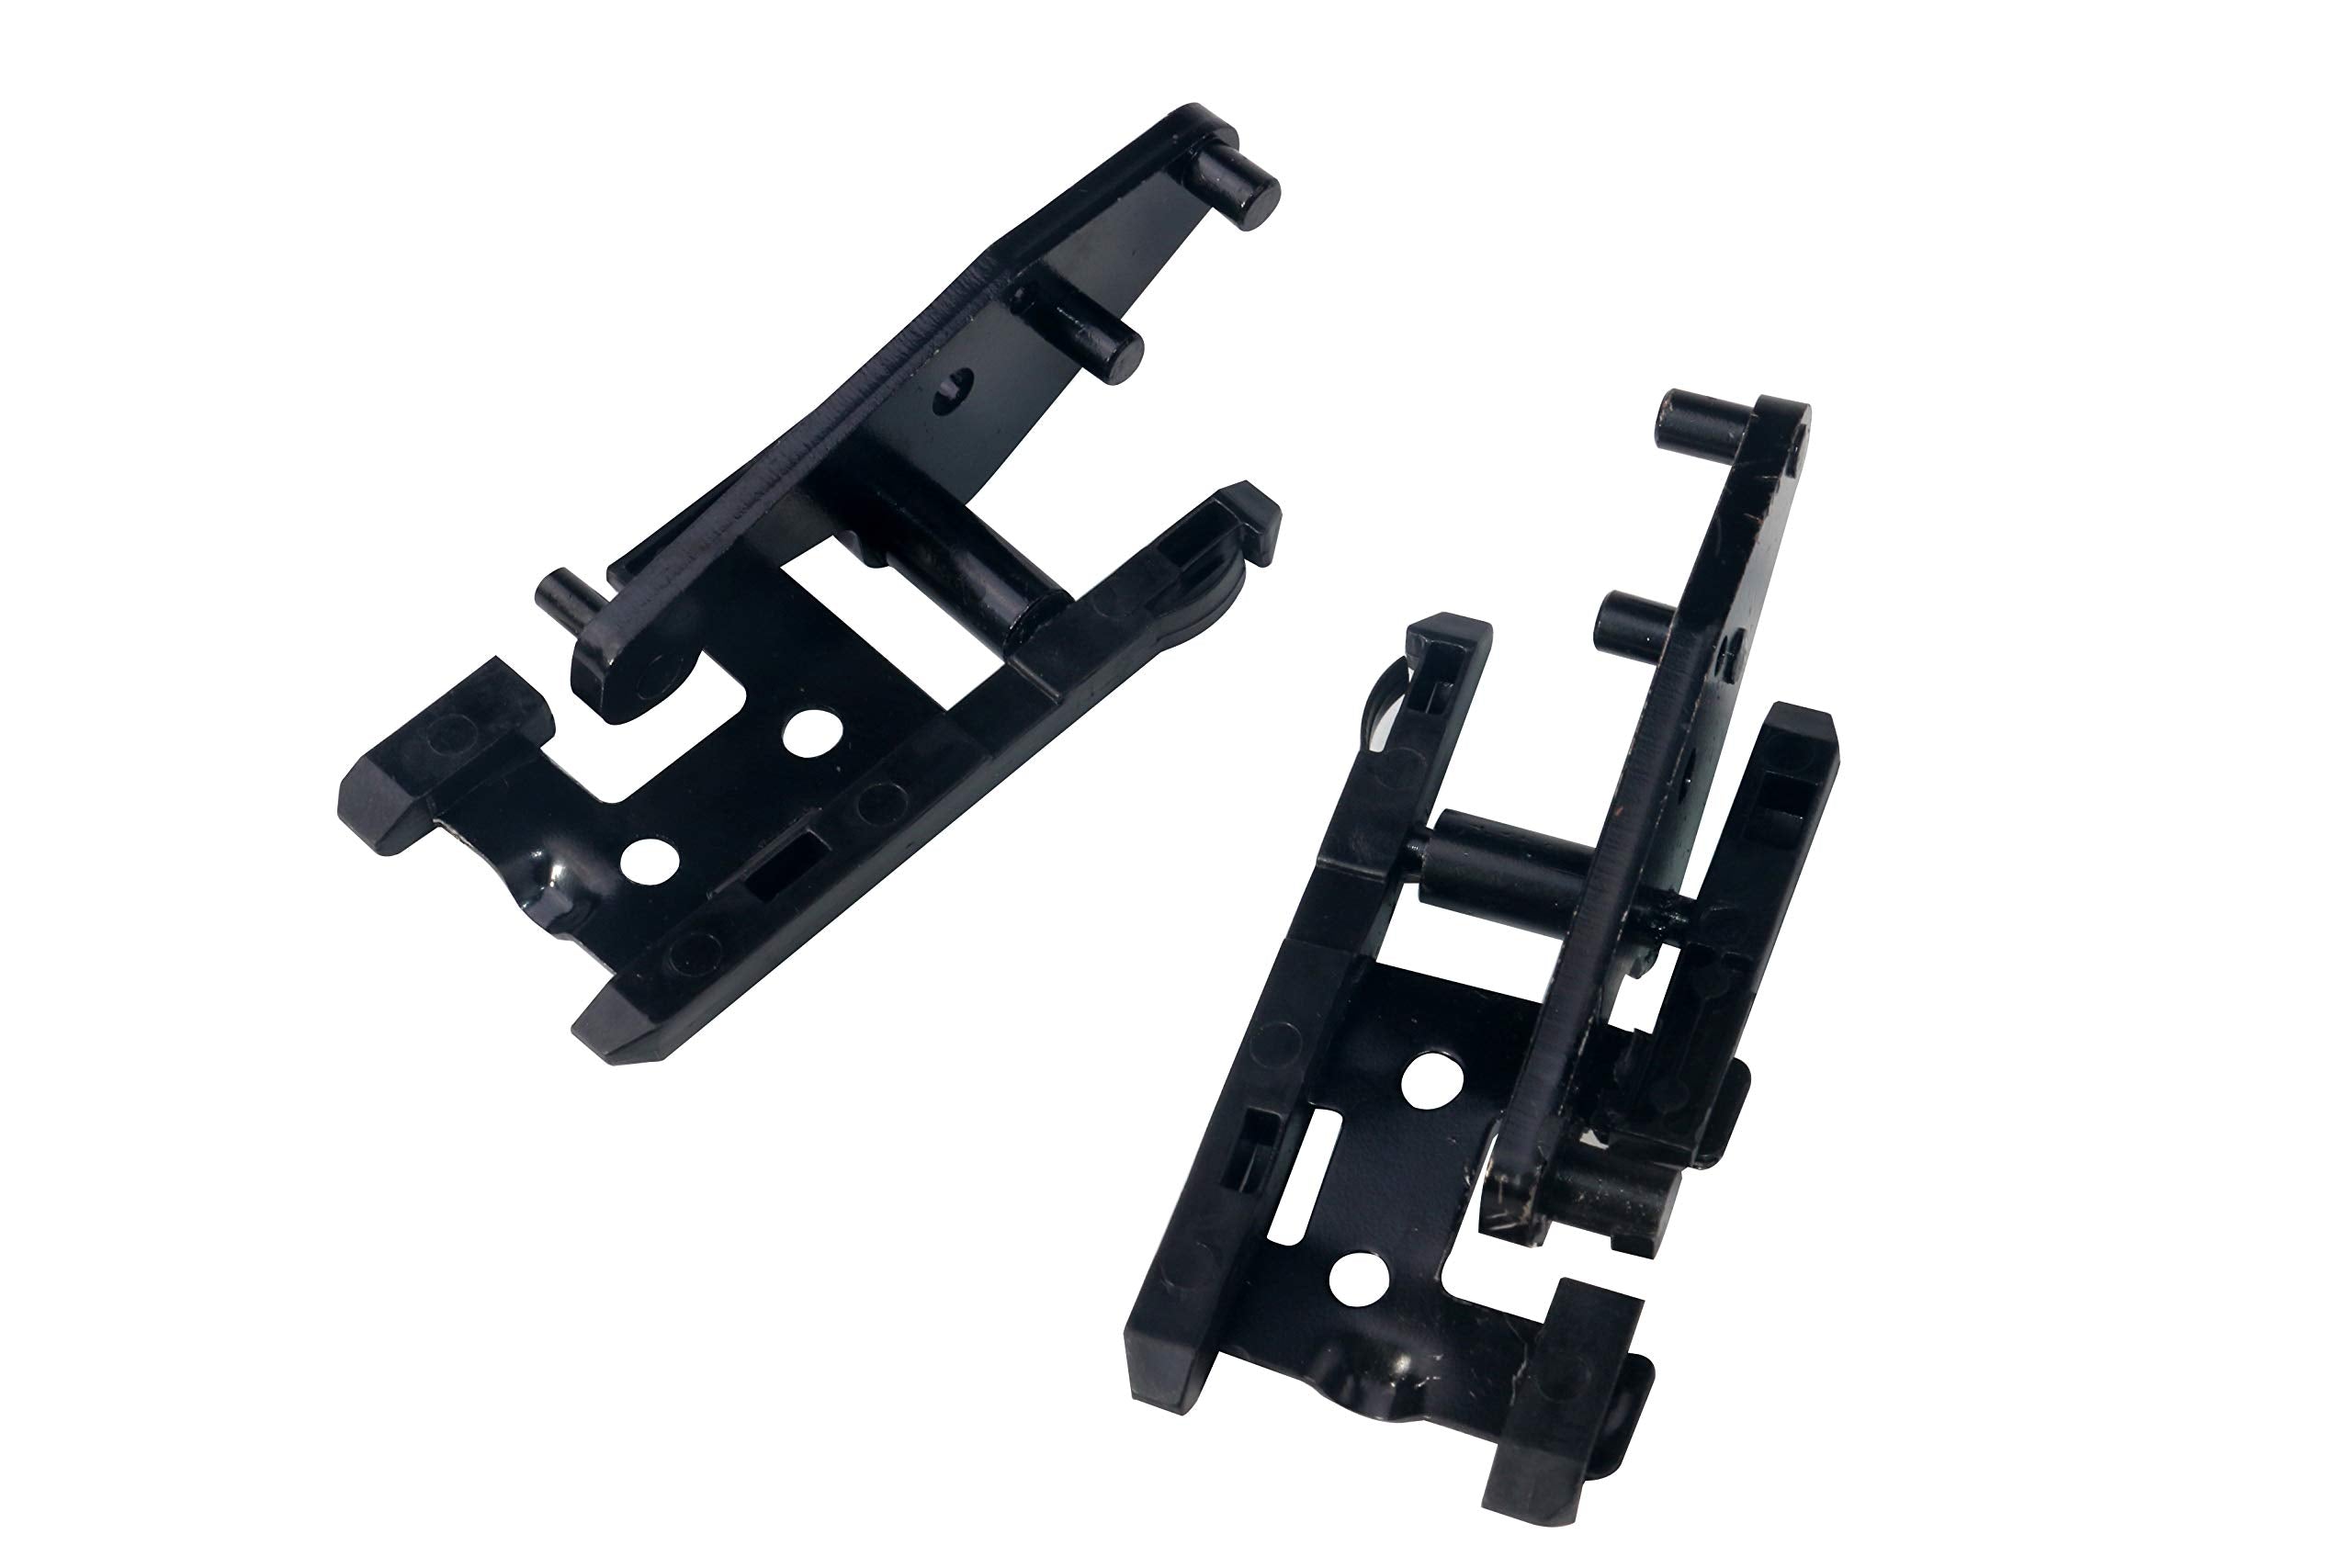 Sunroof Repair Kit for Ford-P3  - Like New